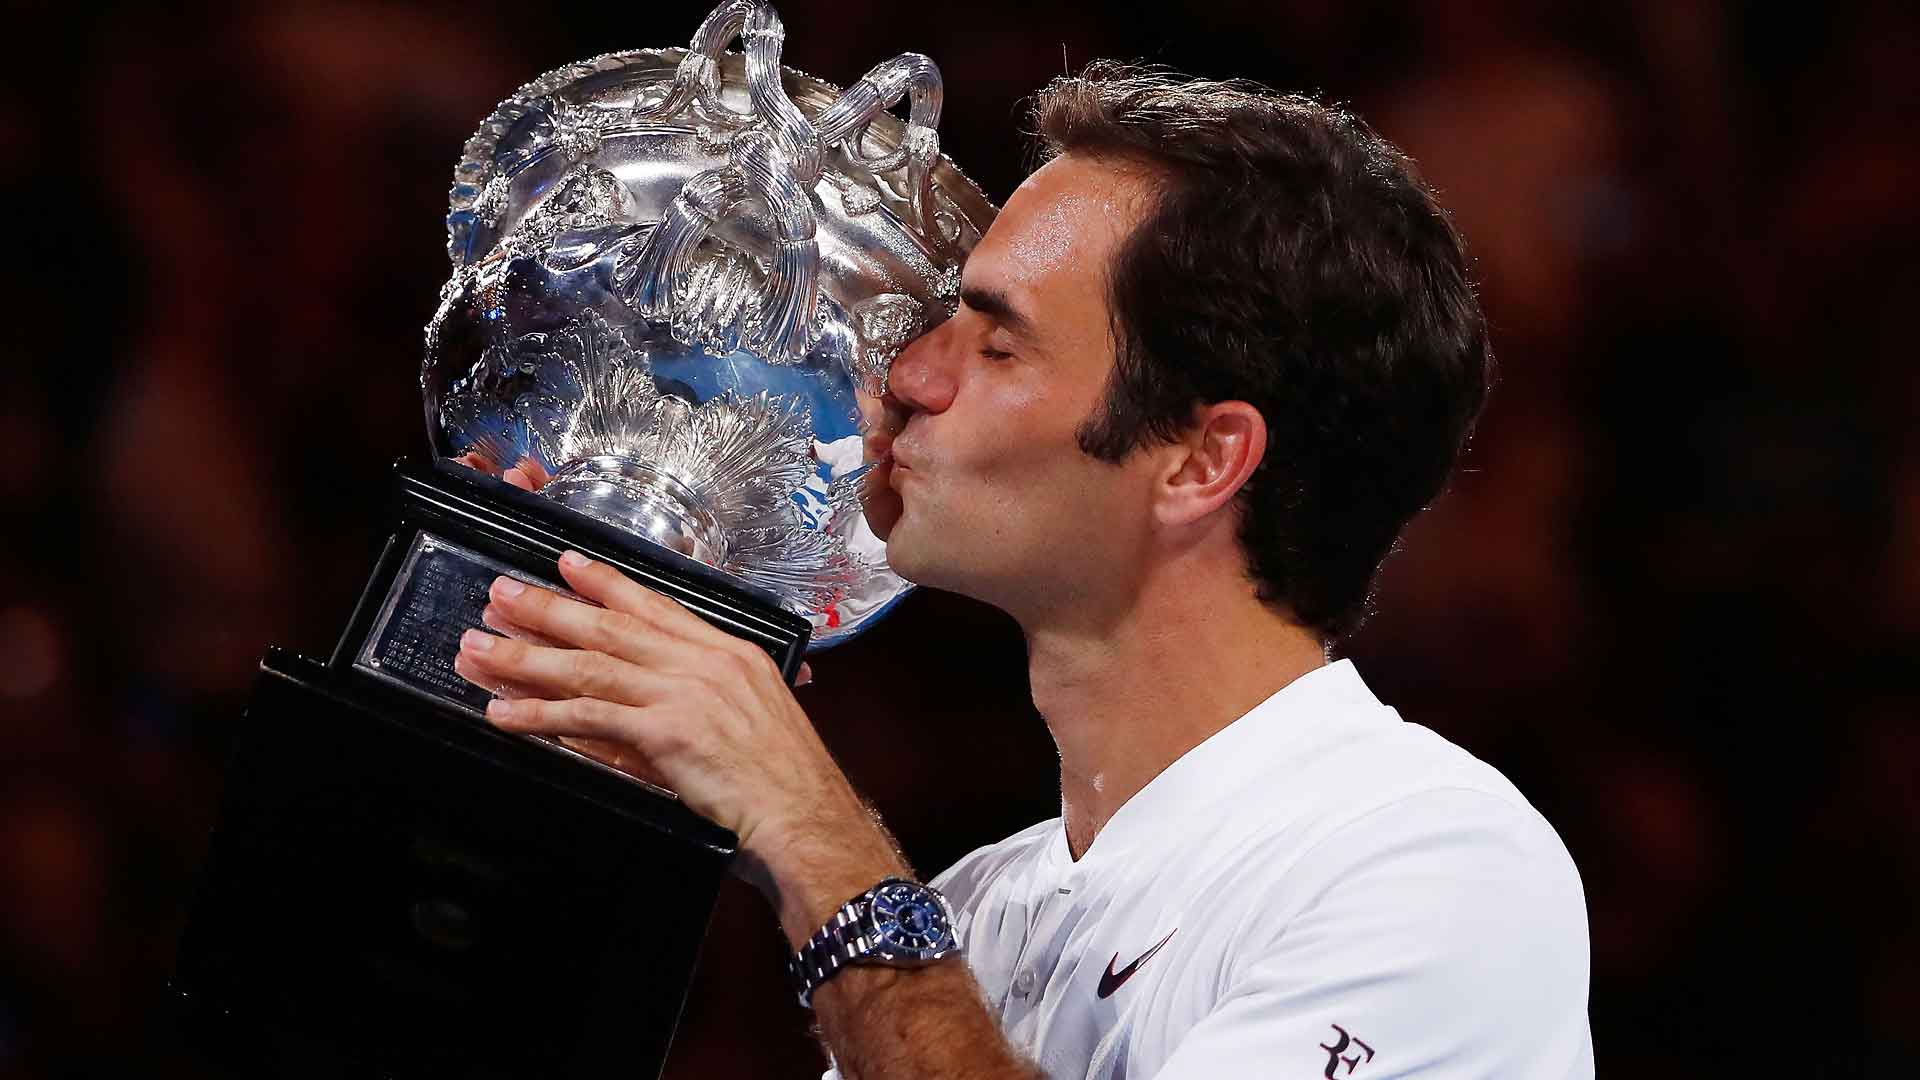 Roger Federer celebrates becoming the first man in tennis history to win 20 Grand Slam championship trophies on Sunday at the Australian Open.